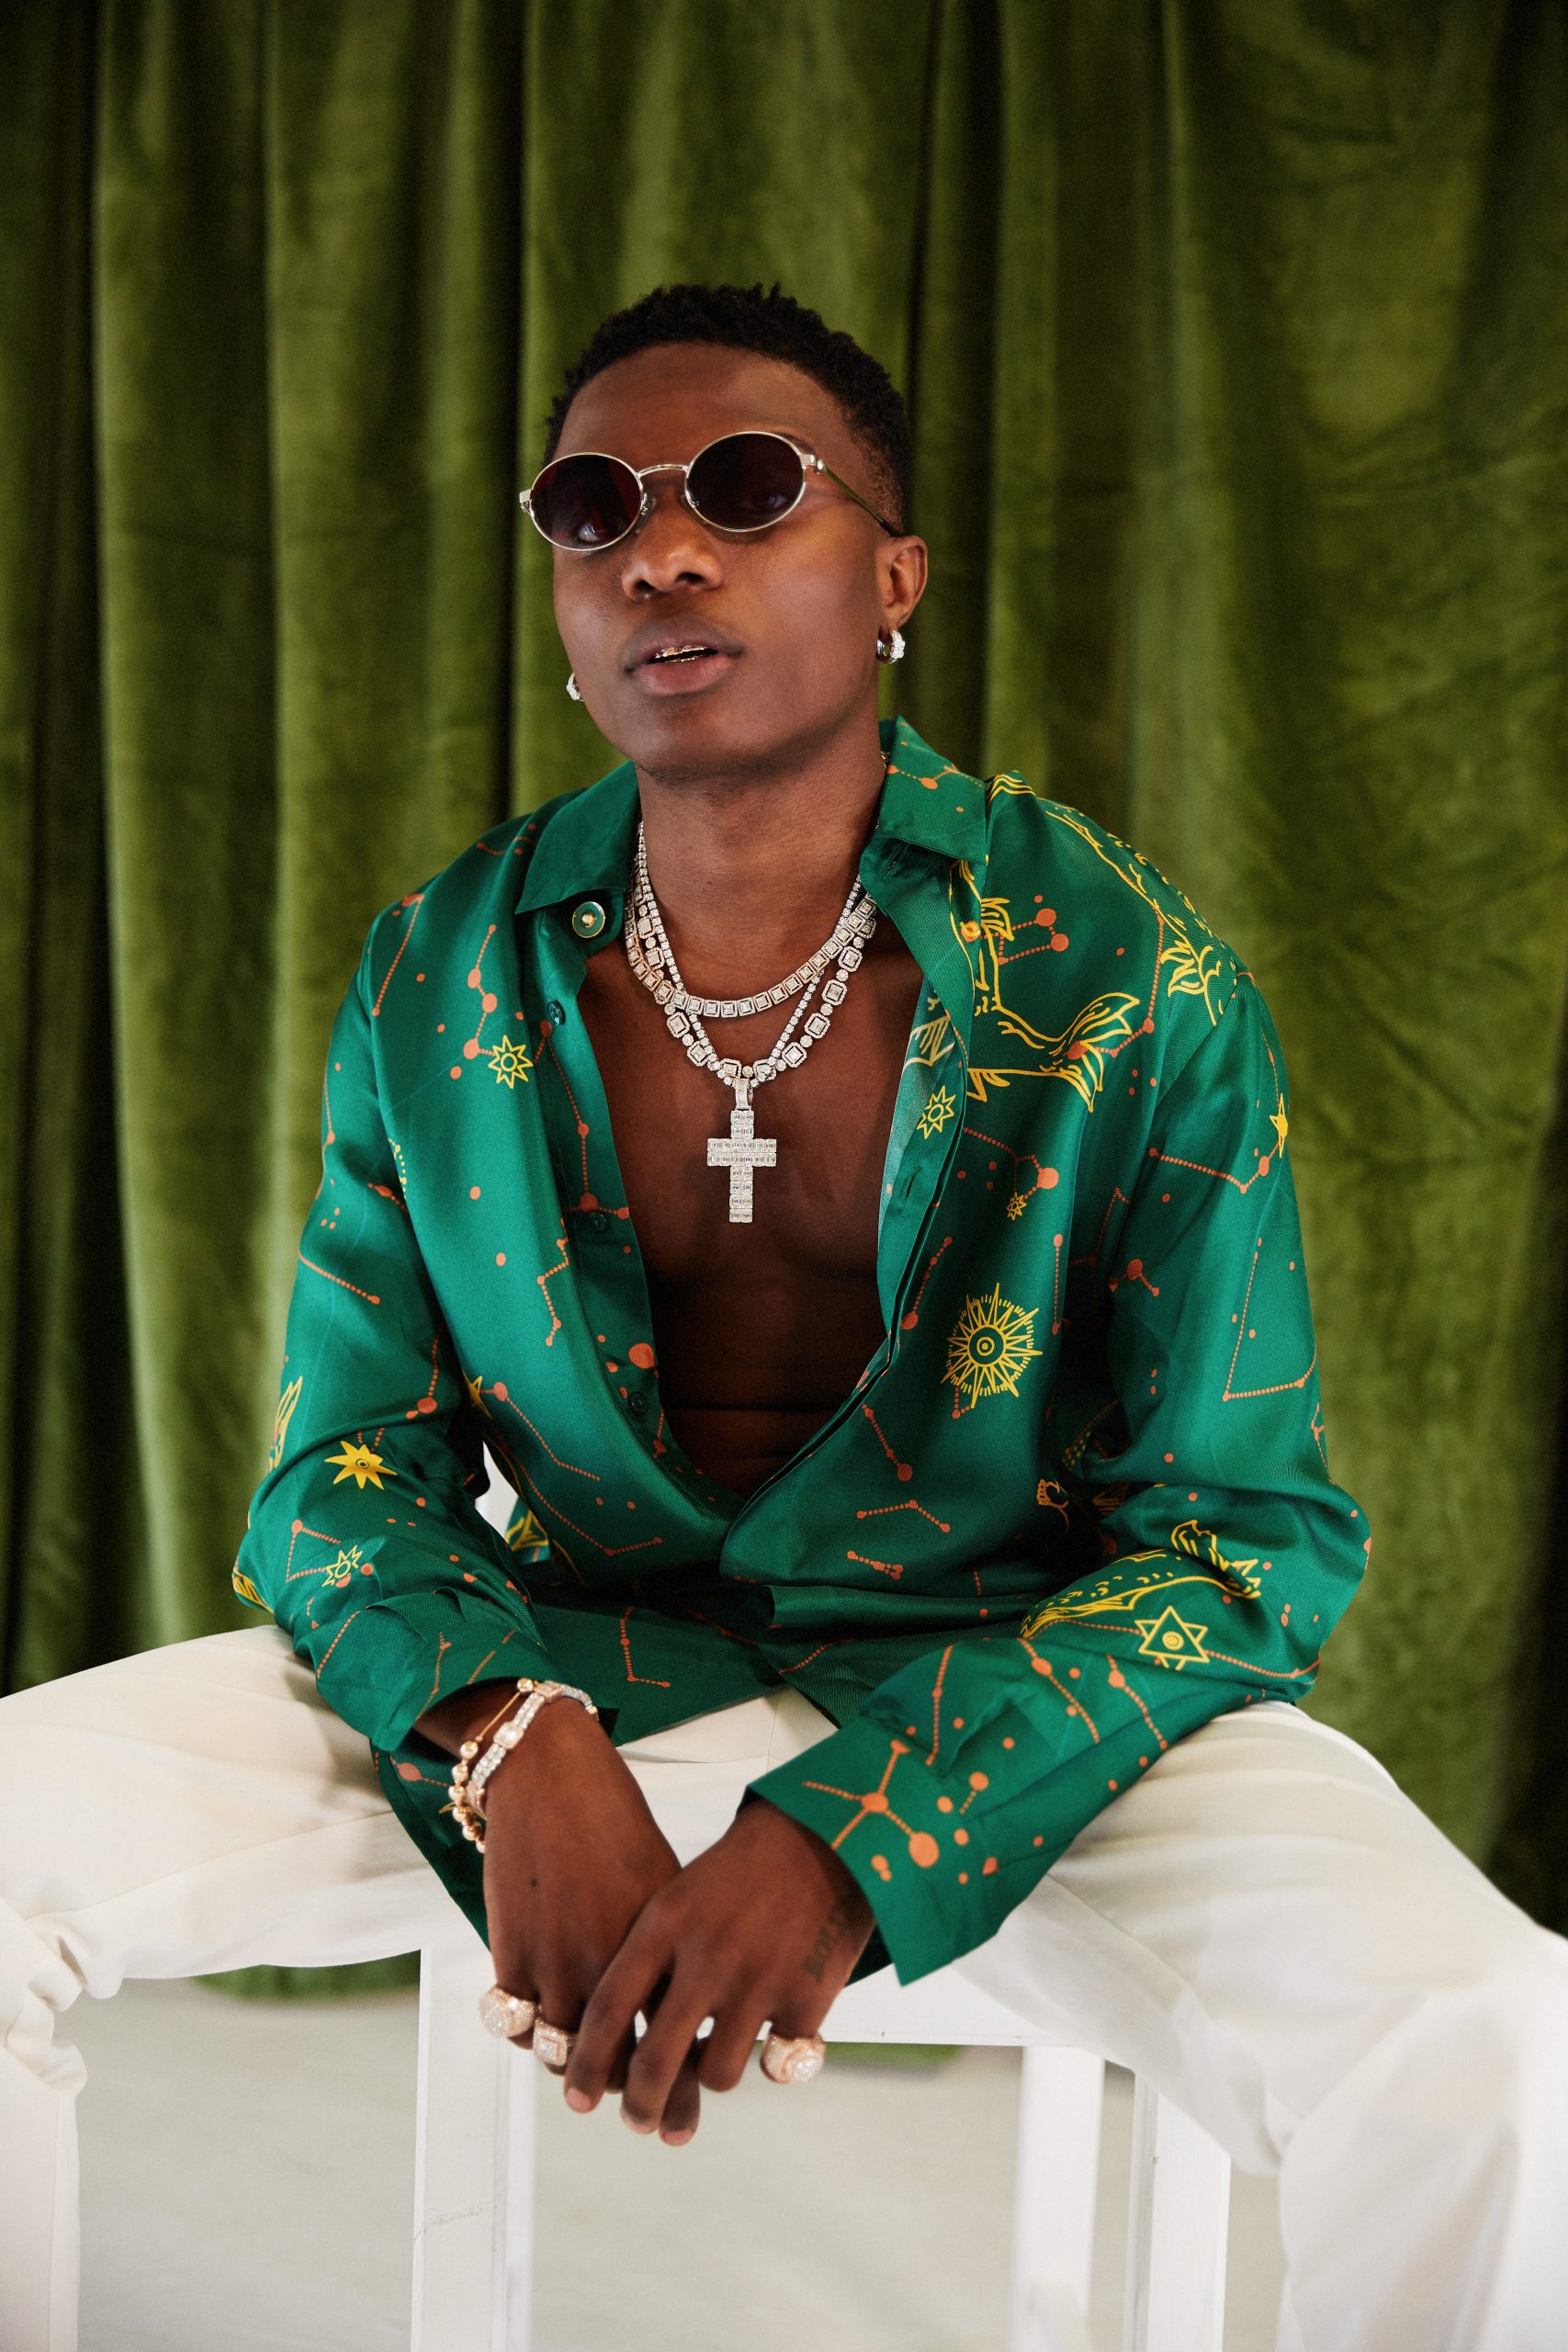 Wizkid Celebrates His Birthday With The Release of “Smile” Featuring H.E.R.  - RCA Records